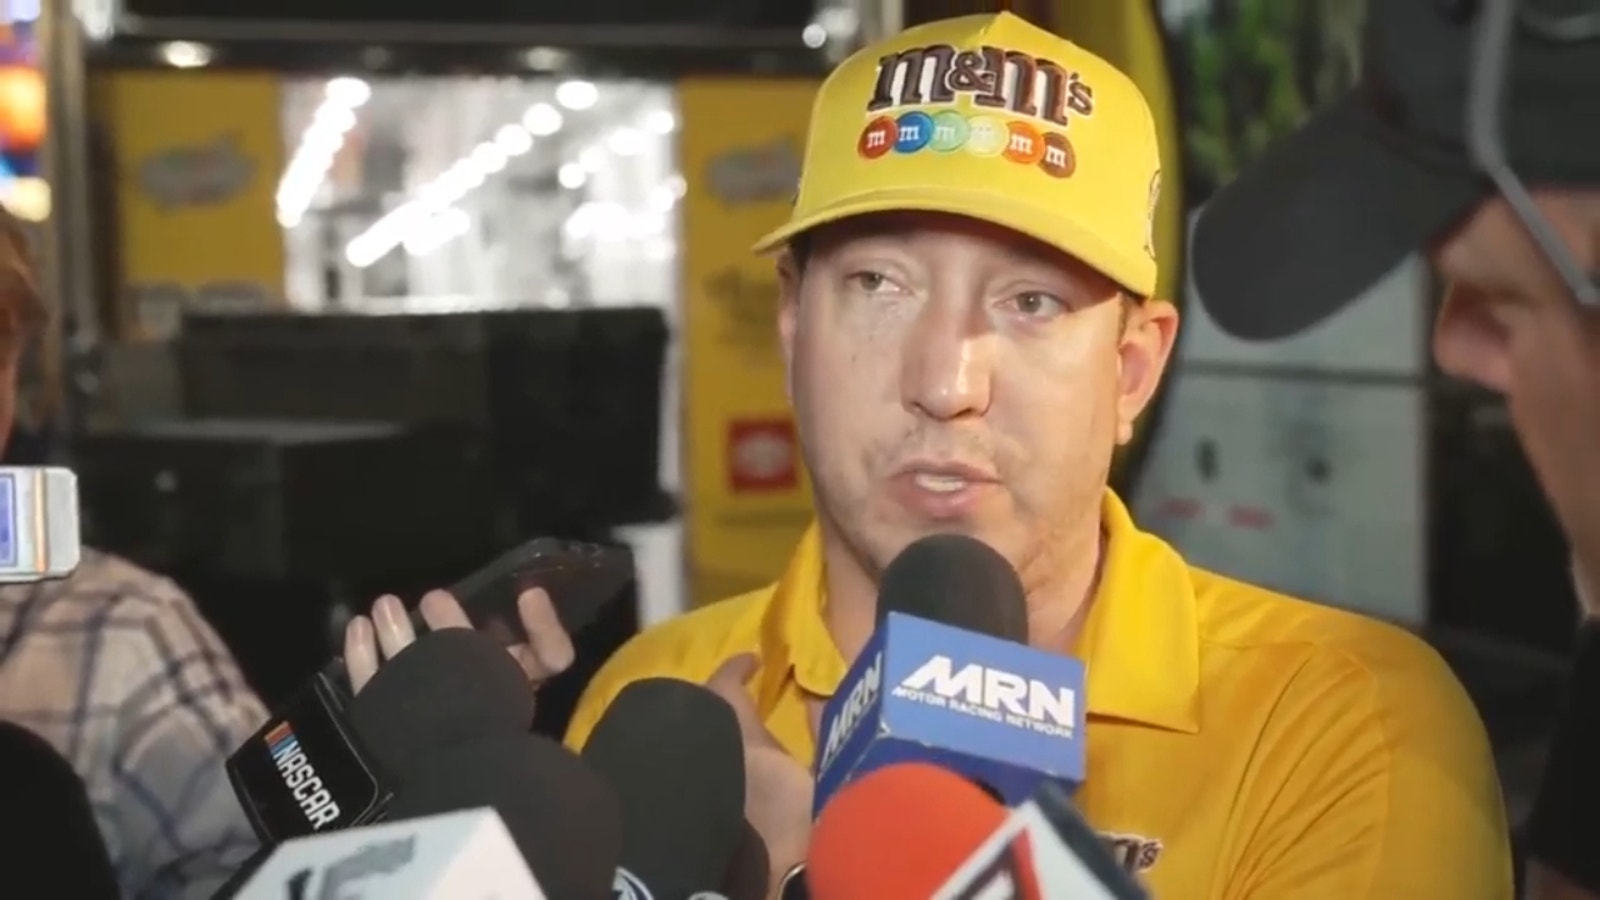 Kyle Busch on his night ending early after engine trouble